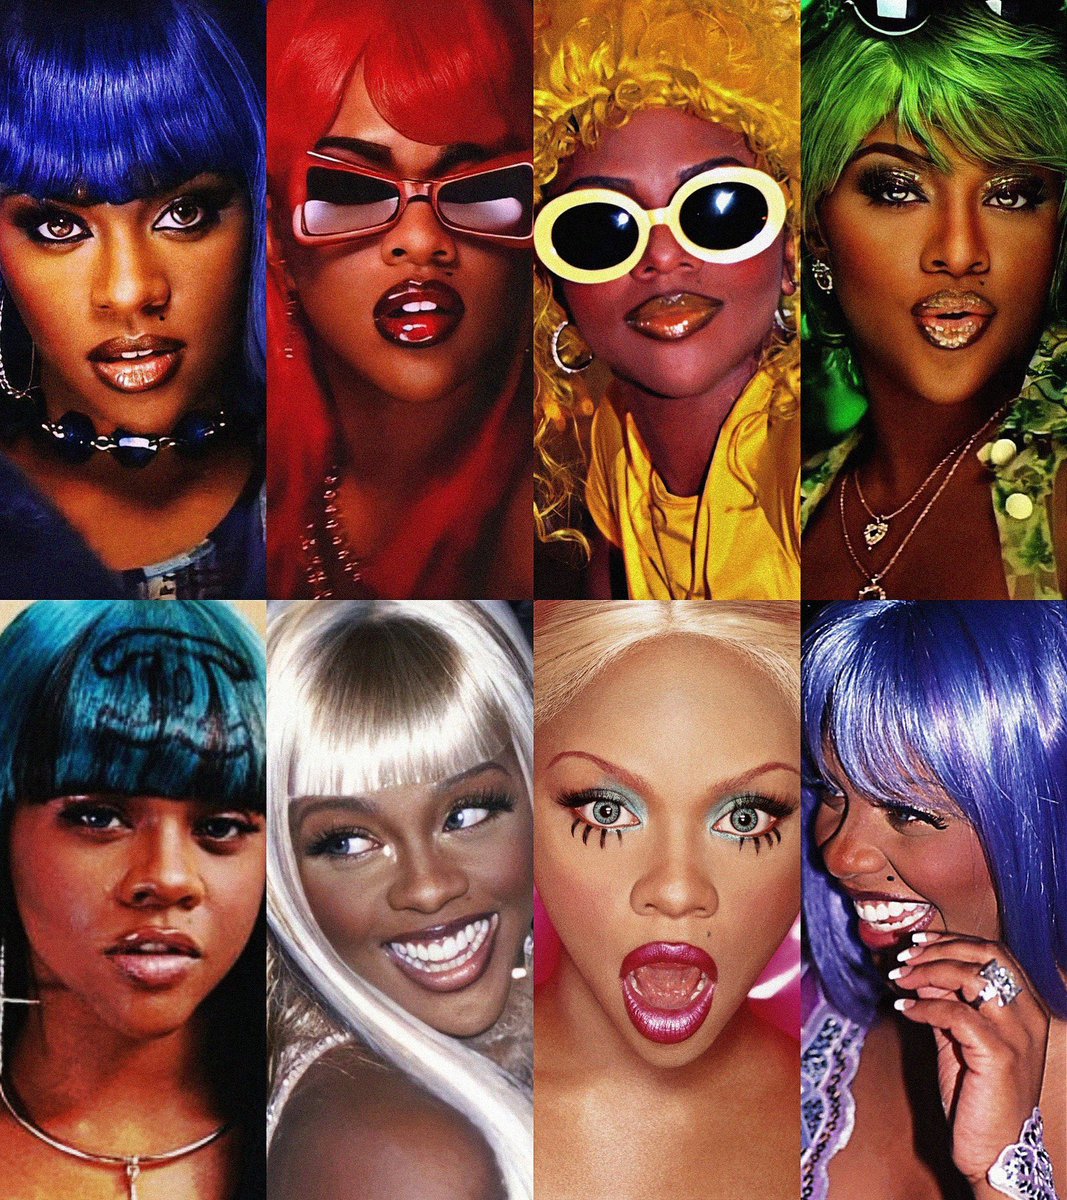 I’ve always wanted Lil’ Kim to brand “Y2KIM” cause like why hasn’t she 🙂‍↕️

Kim played a big part in transitioning the 90’s into the Y2(KIM) 2000’s in both music and aesthetic. She pushed the envelope unlike any other artist with her risk taking lyricism and fashion.